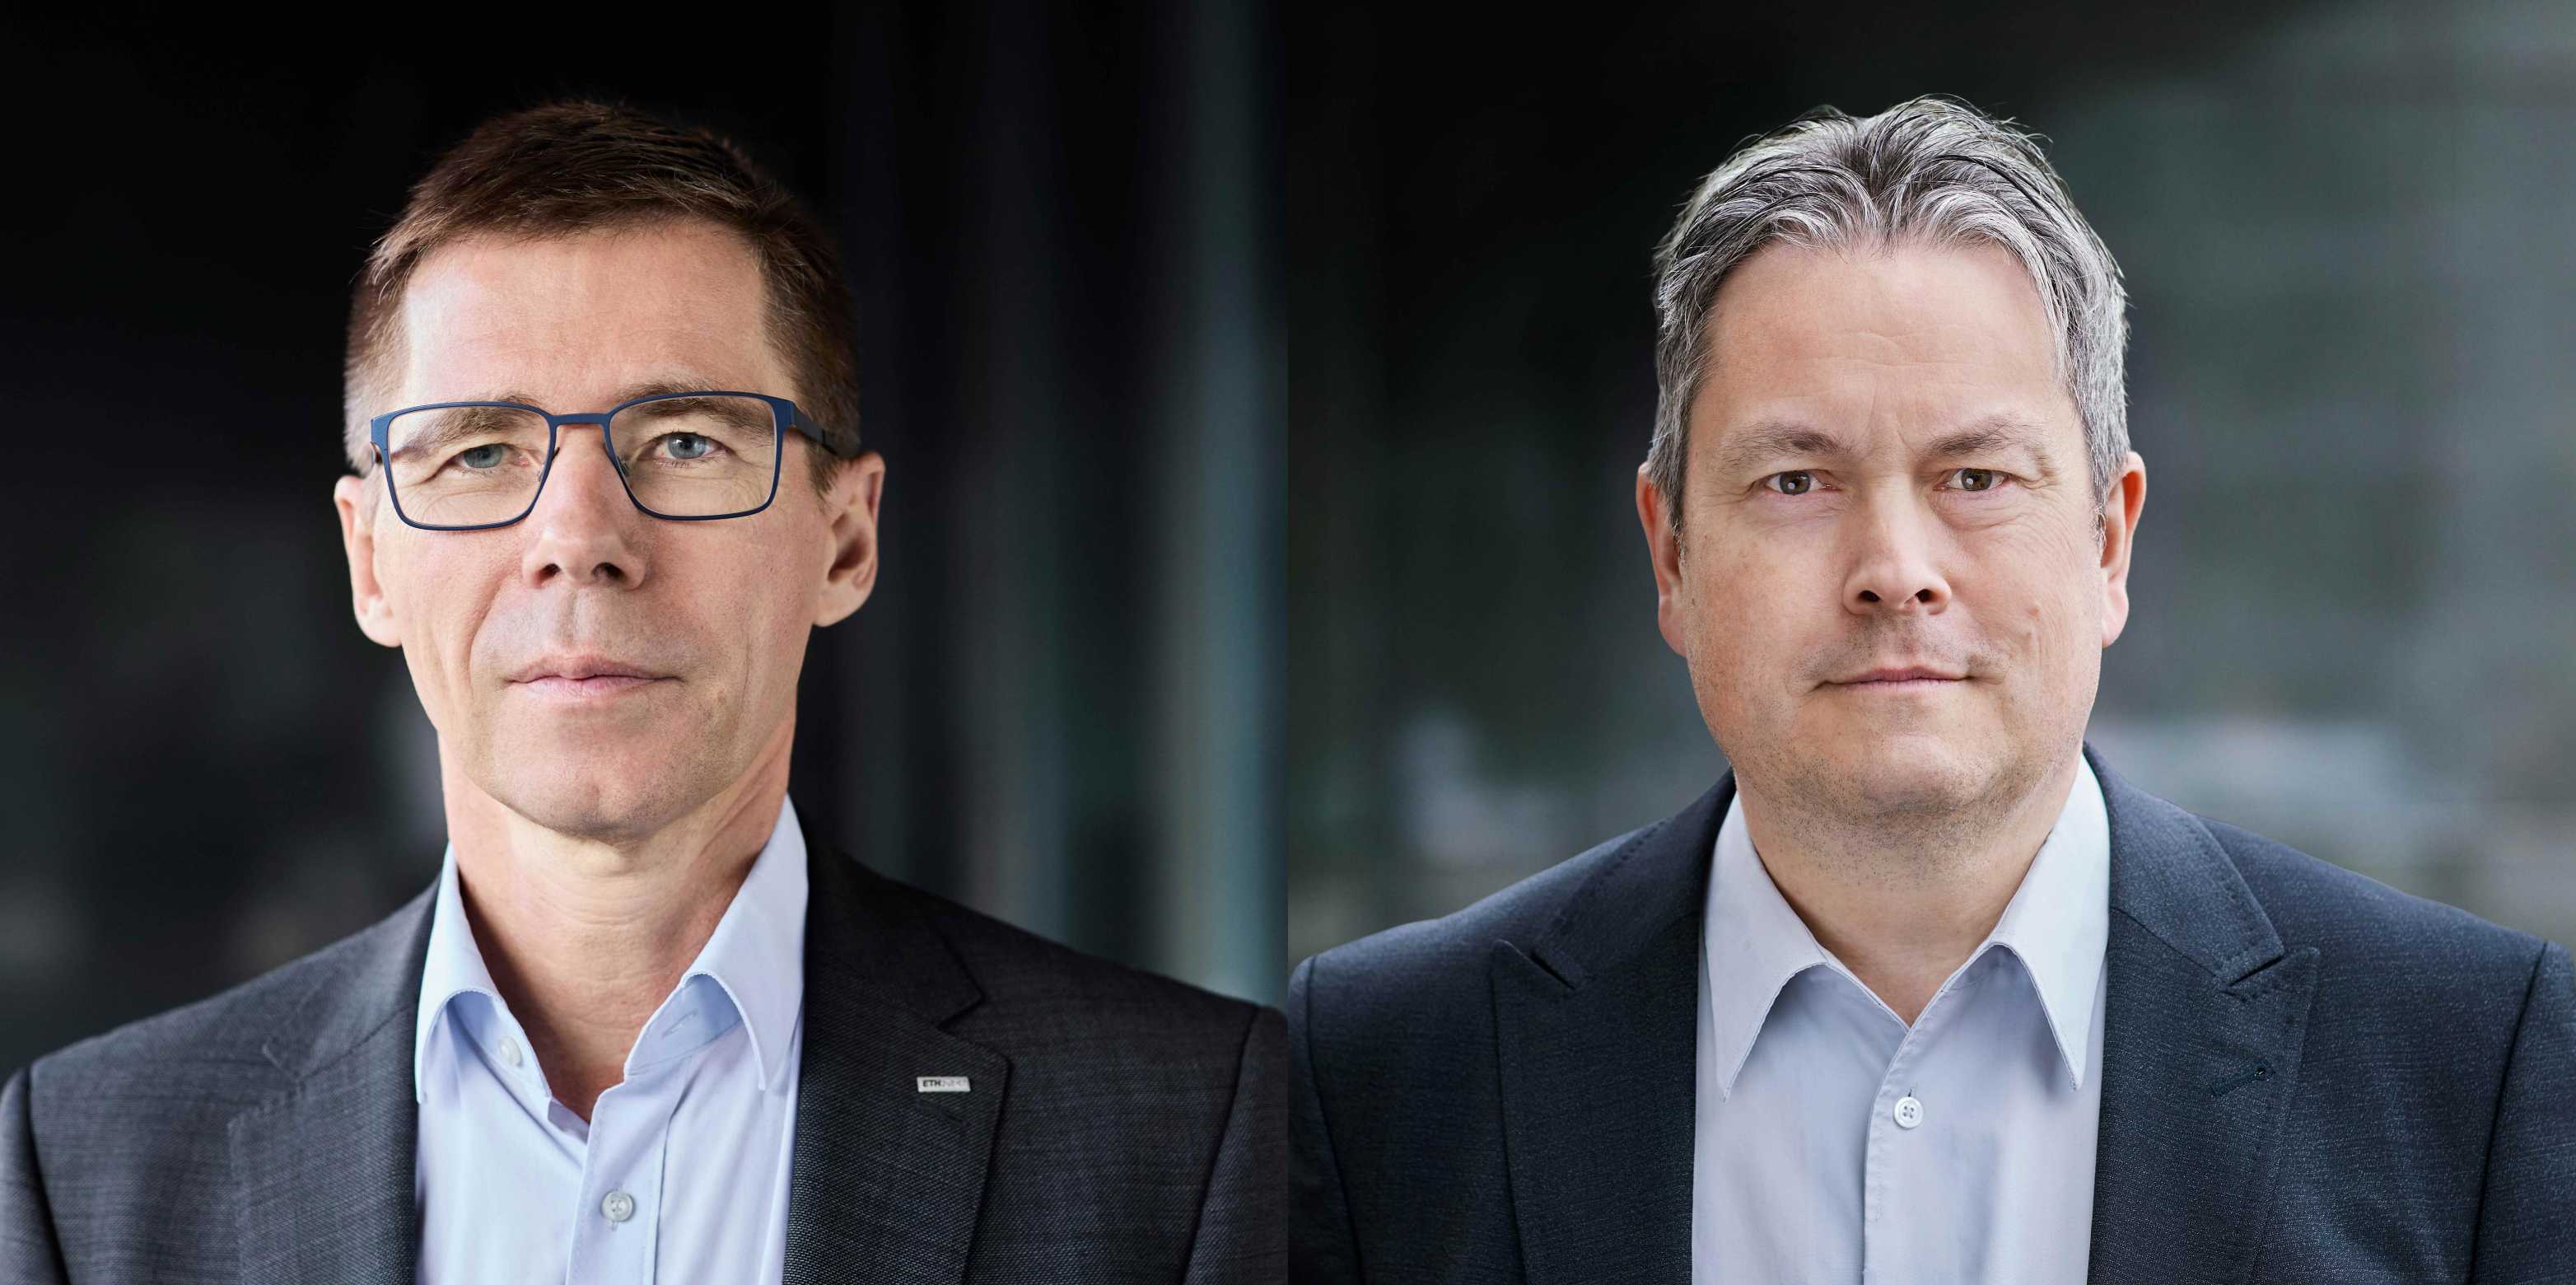 Portraits of ETH-President Joël Mesot and Stefan Spiegel, Vicepresident for Finances and Controlling